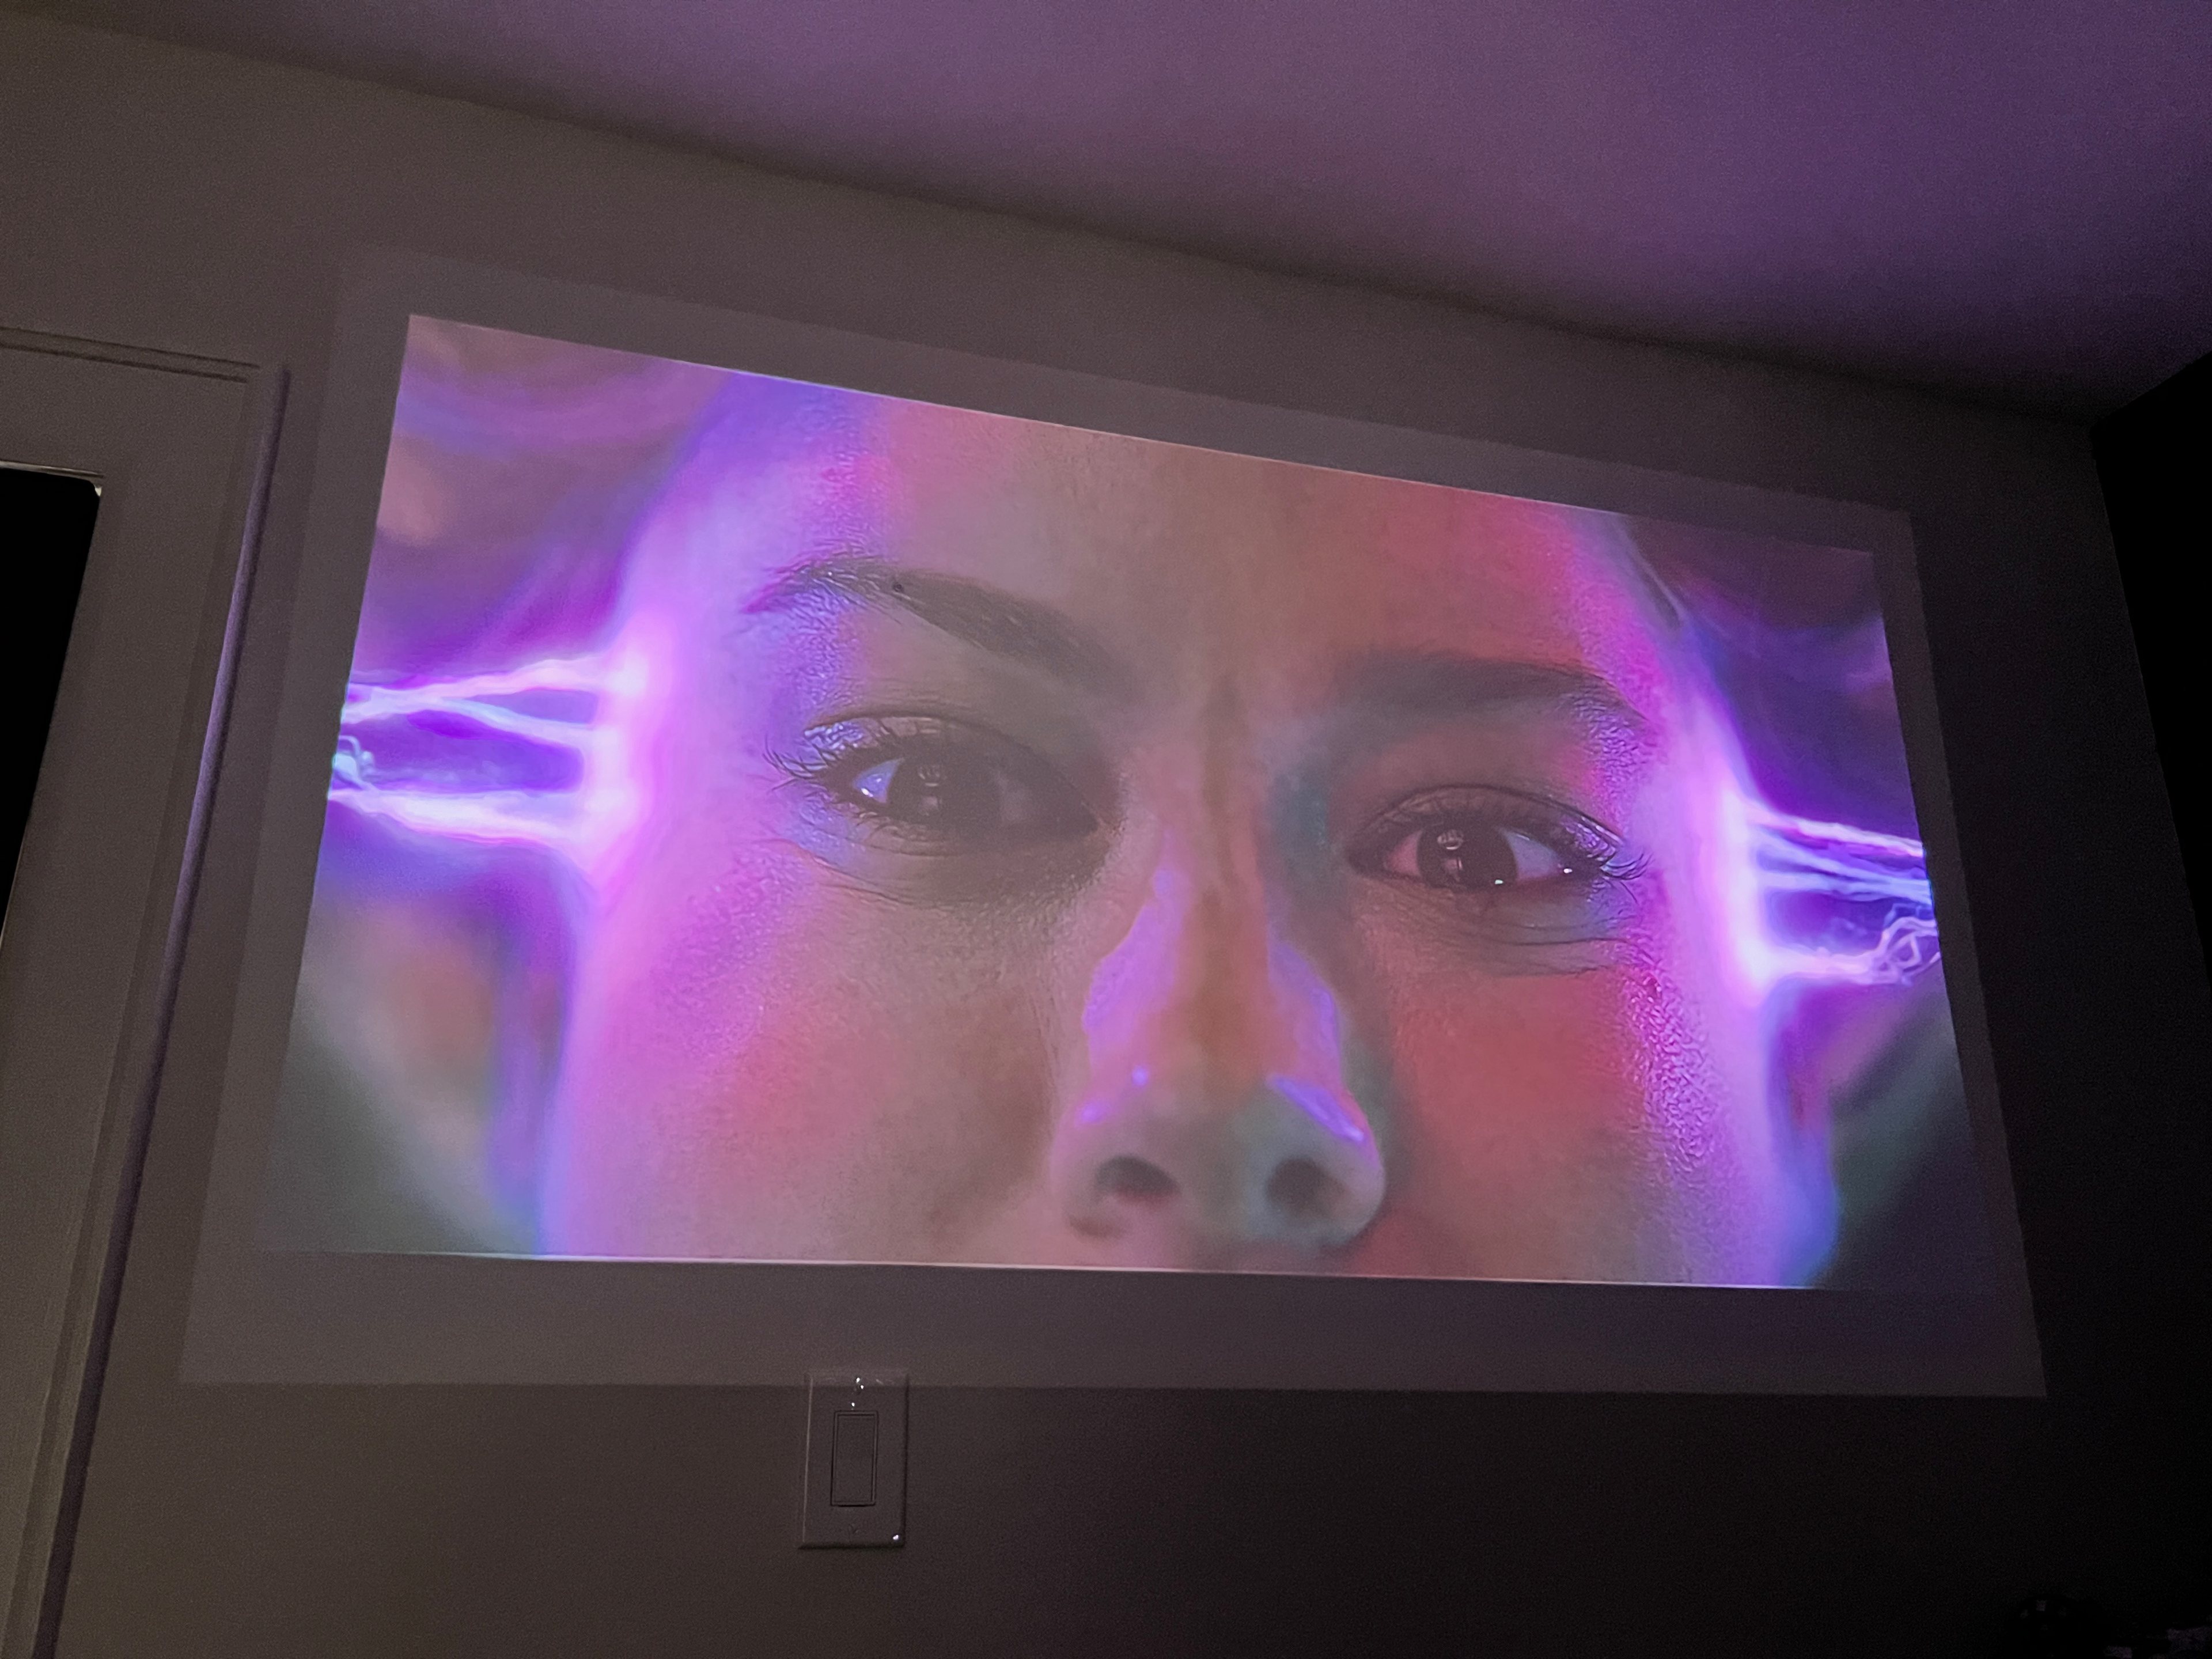 Xgimi MoGo 2 Pro review: a mighty, mini Android TV projector